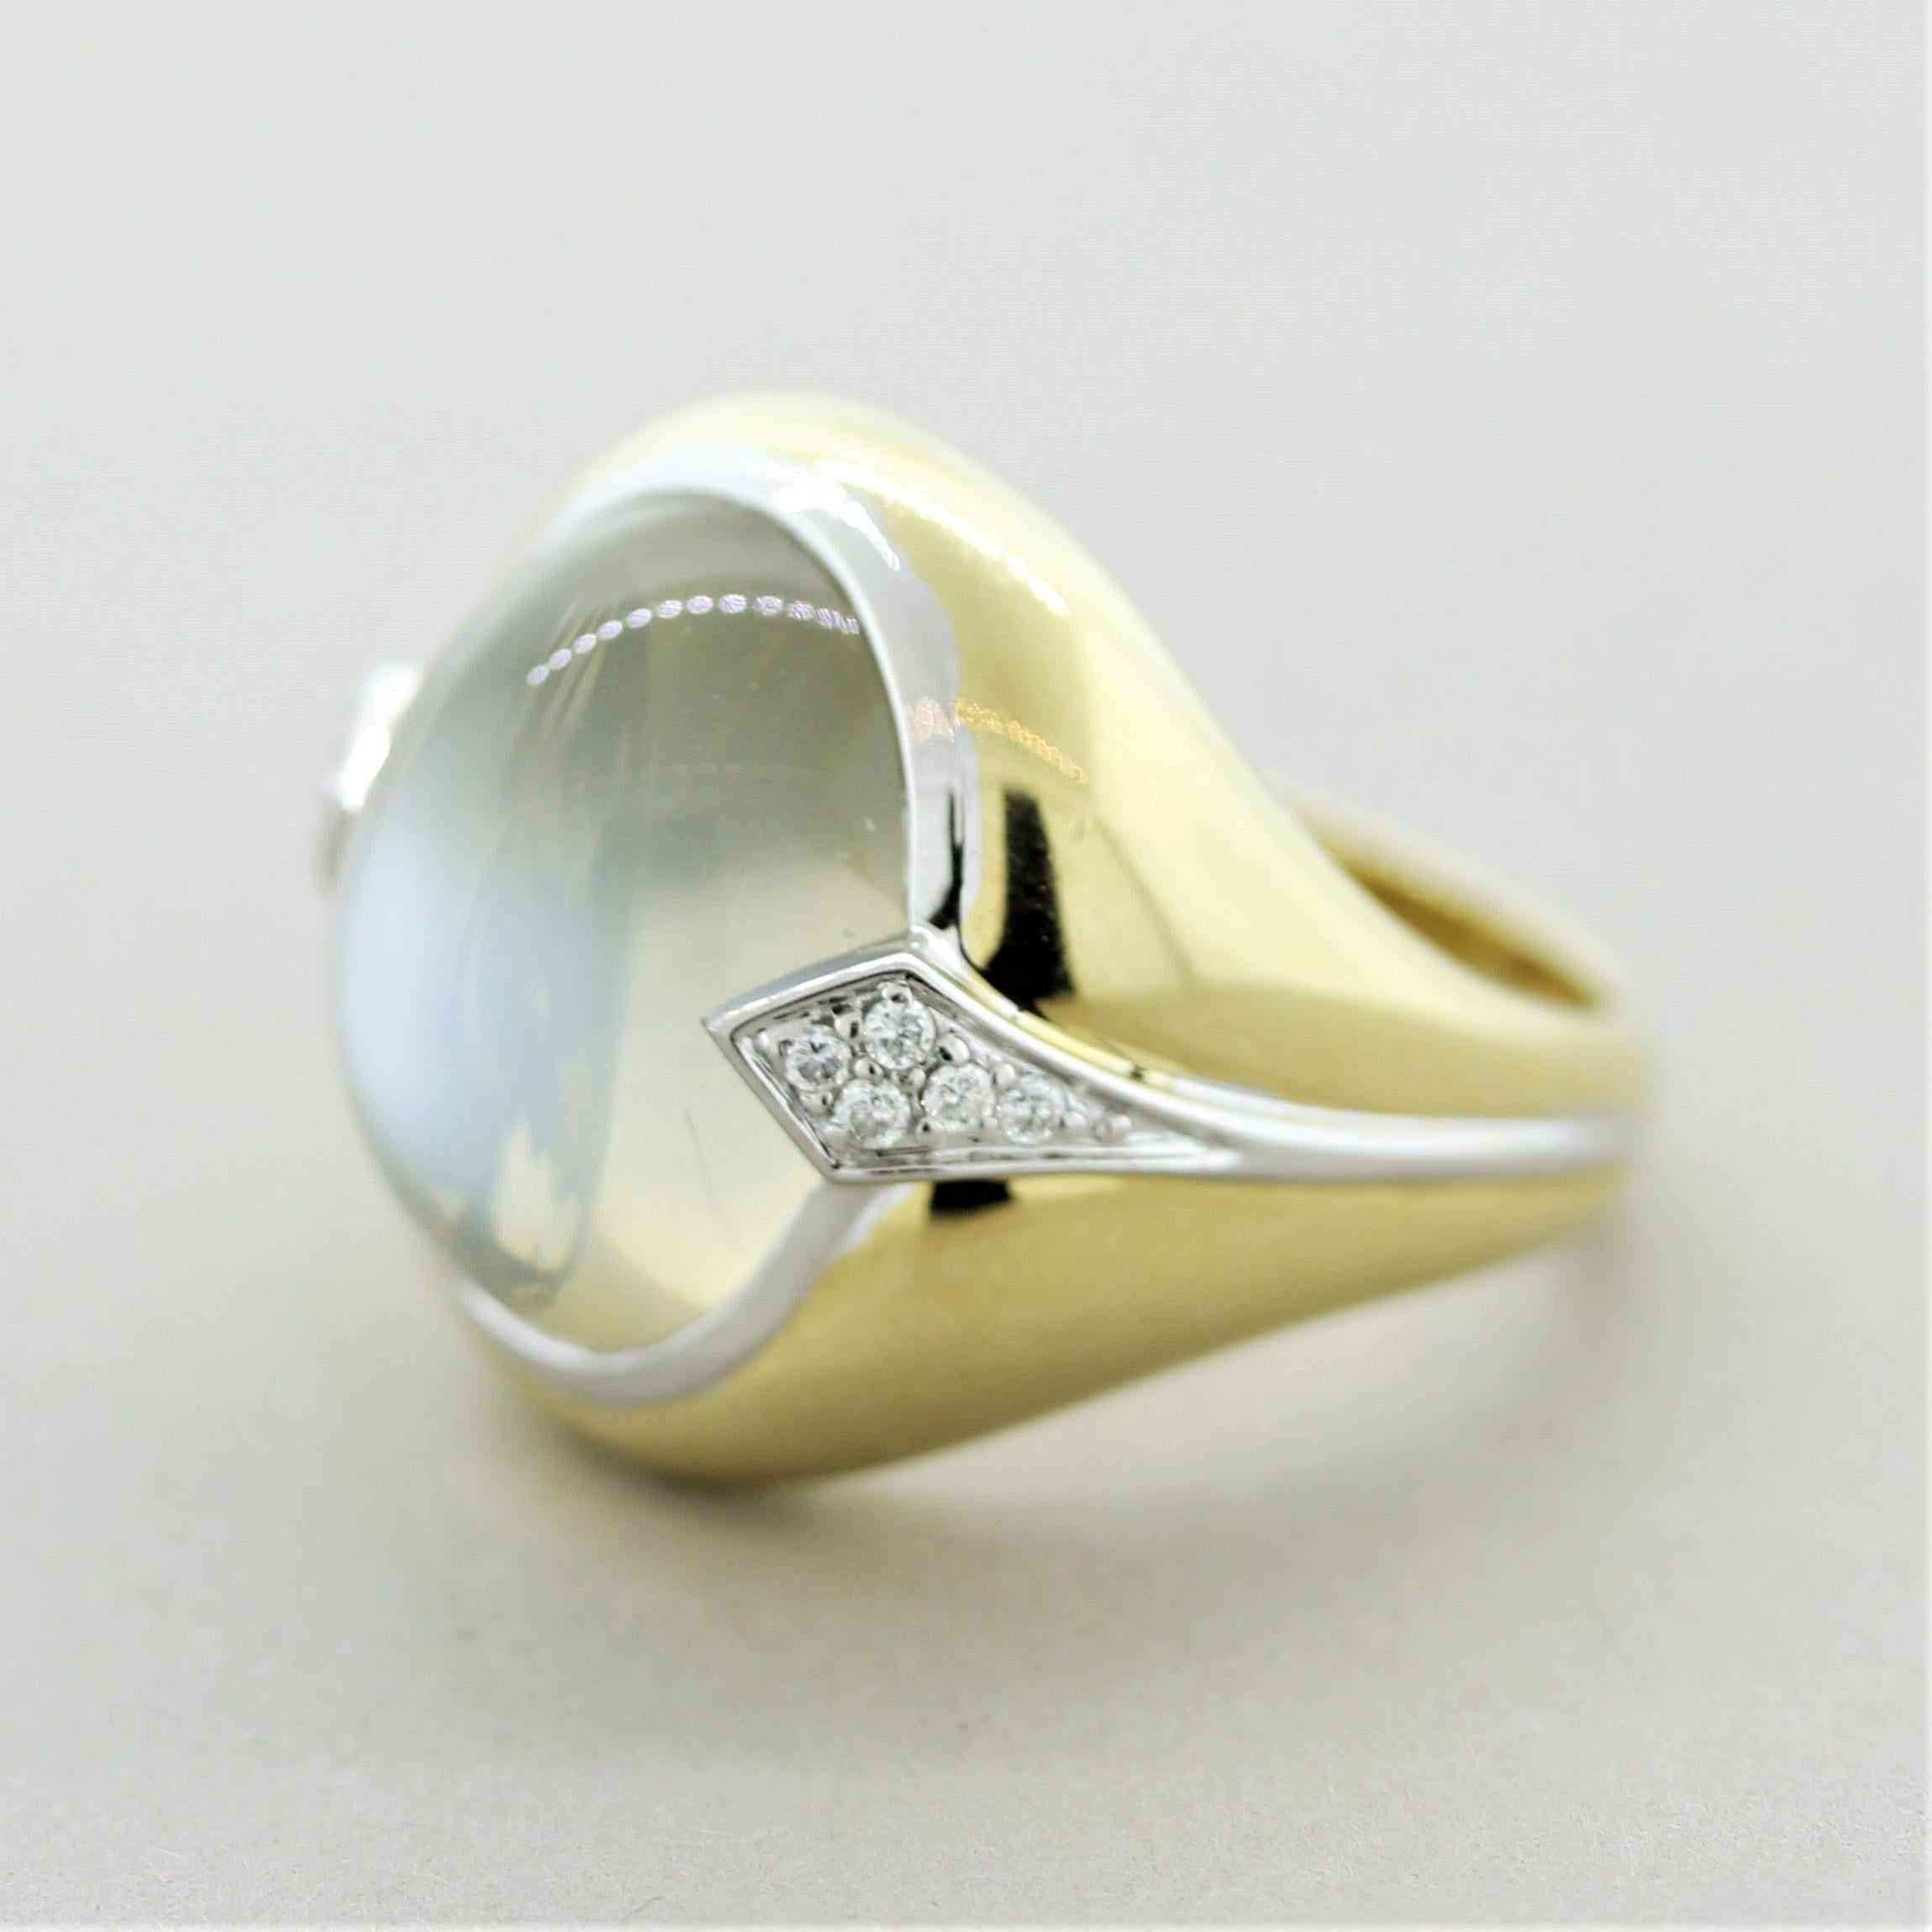 Mixed Cut Fine Moonstone Diamond Gold Cocktail Ring